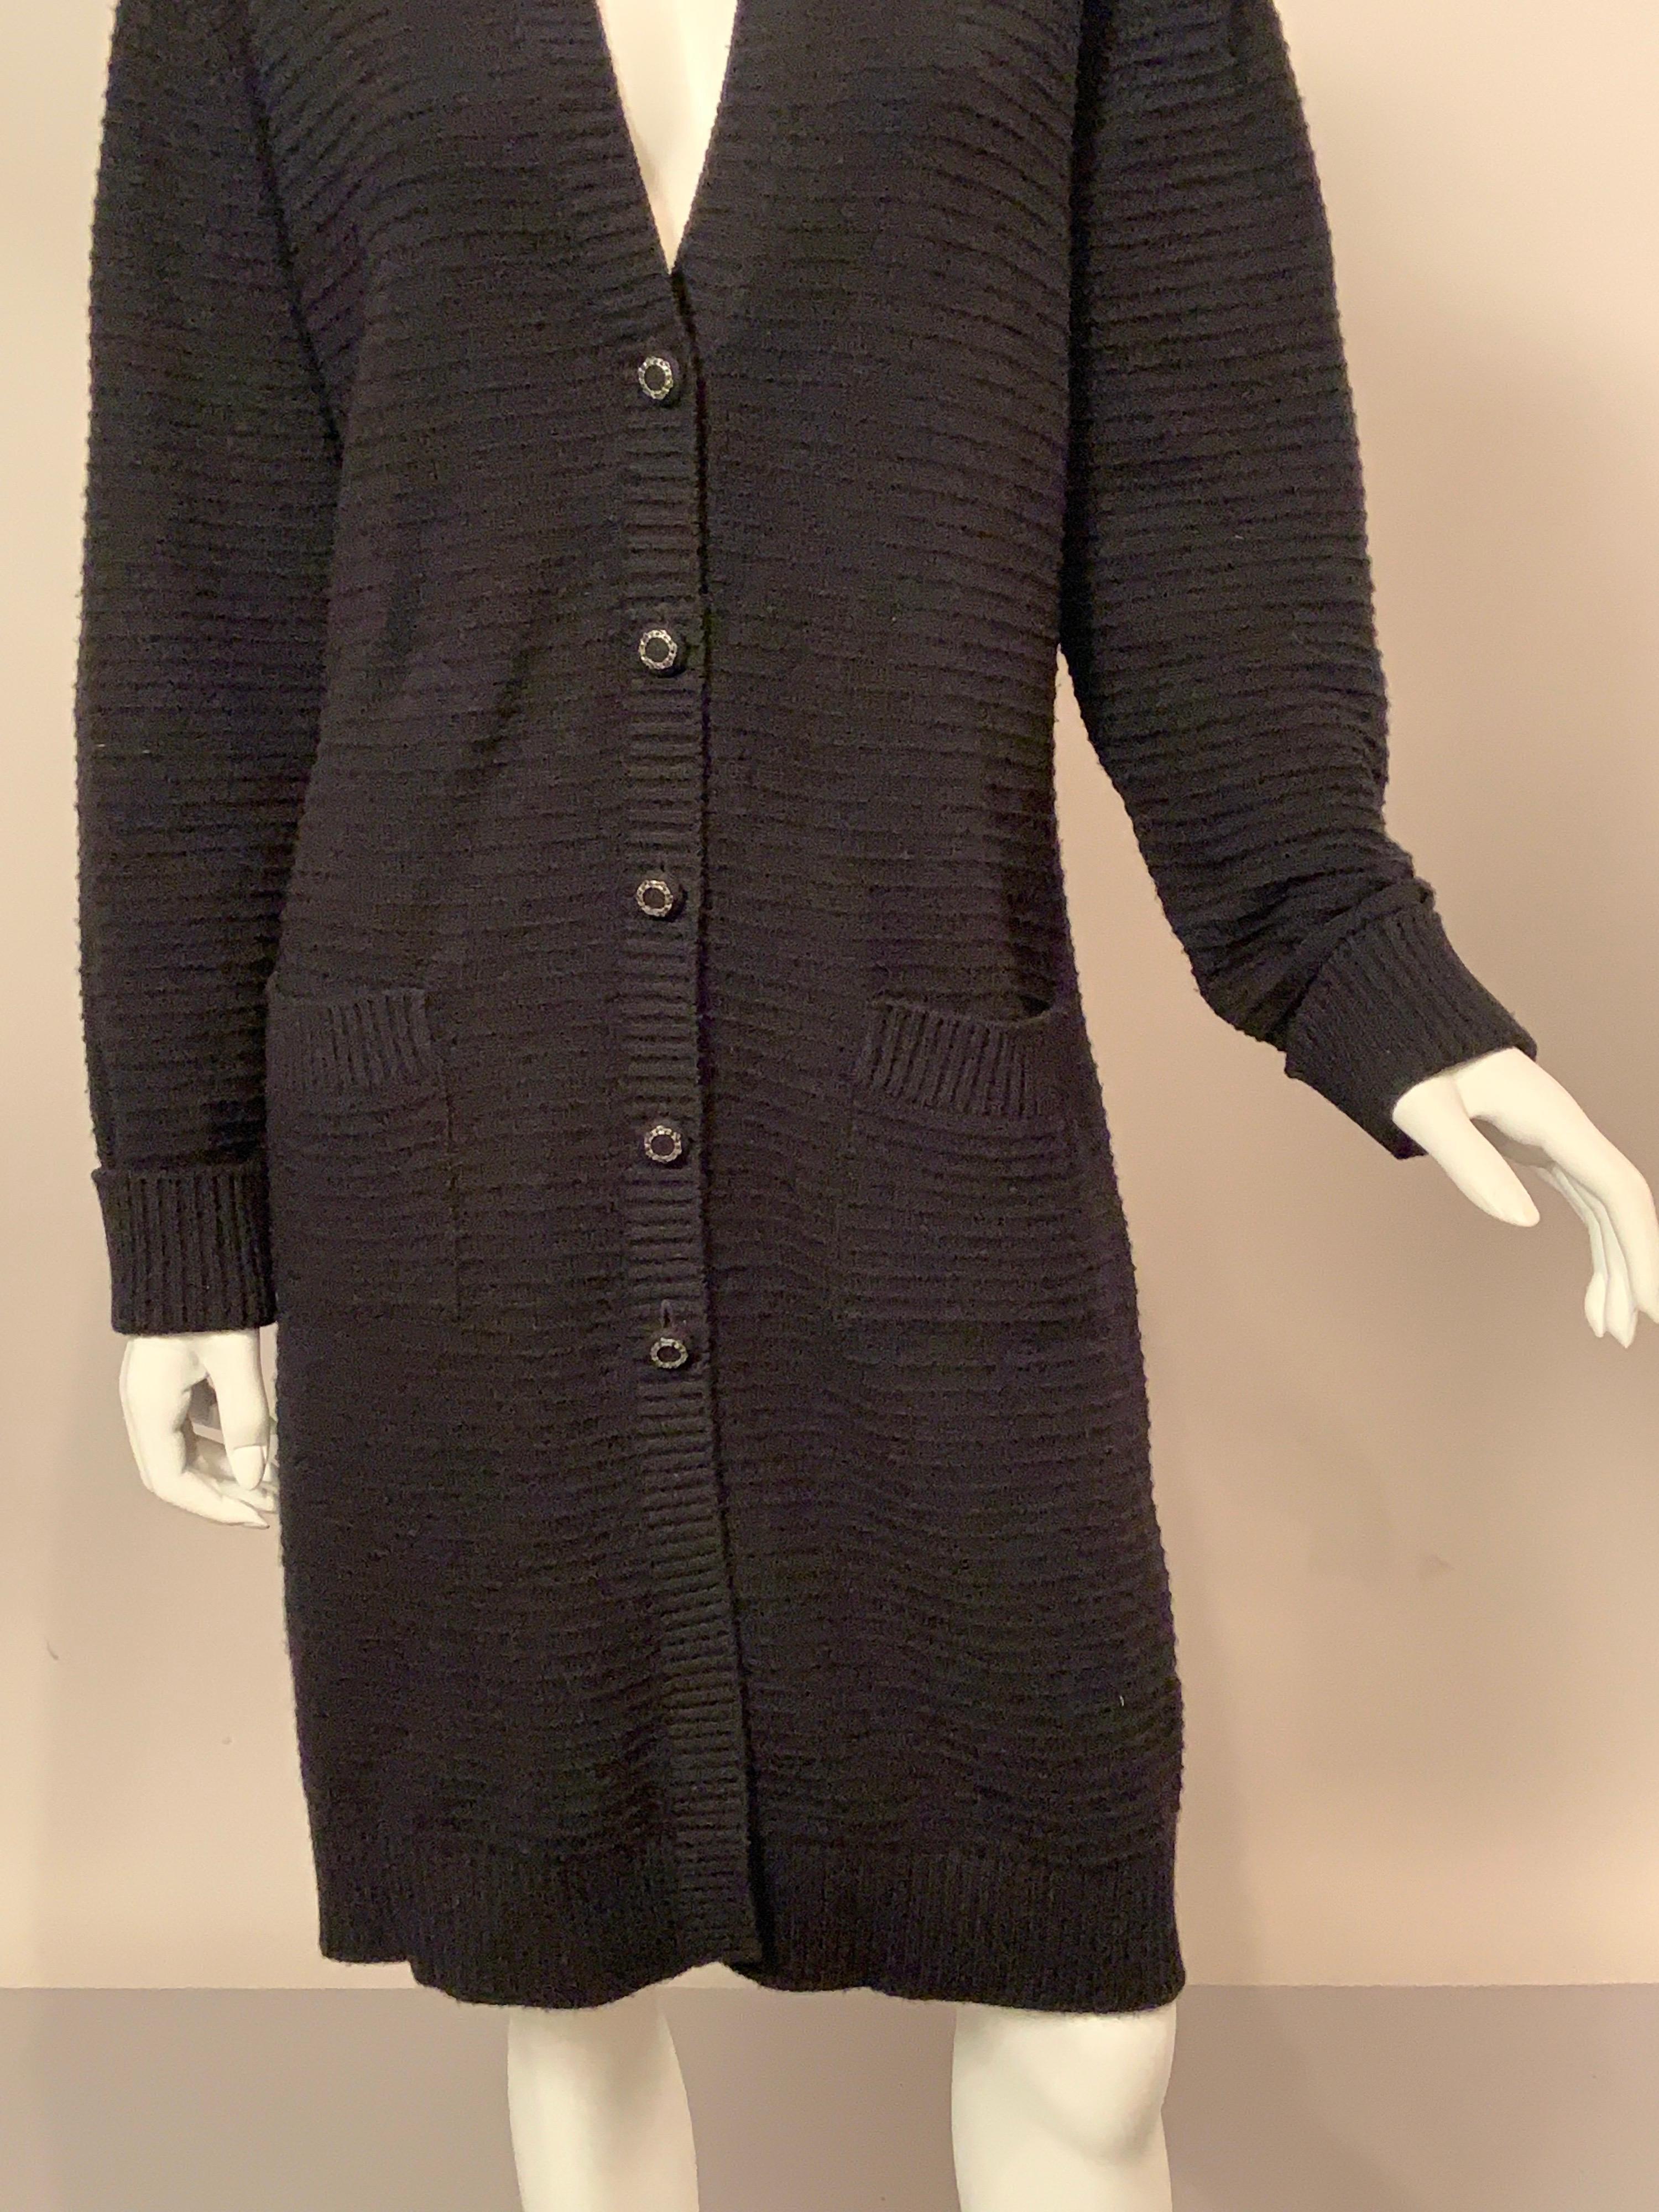 Chanel Black Cashmere Long Cardigan Sweater, Larger Size 11